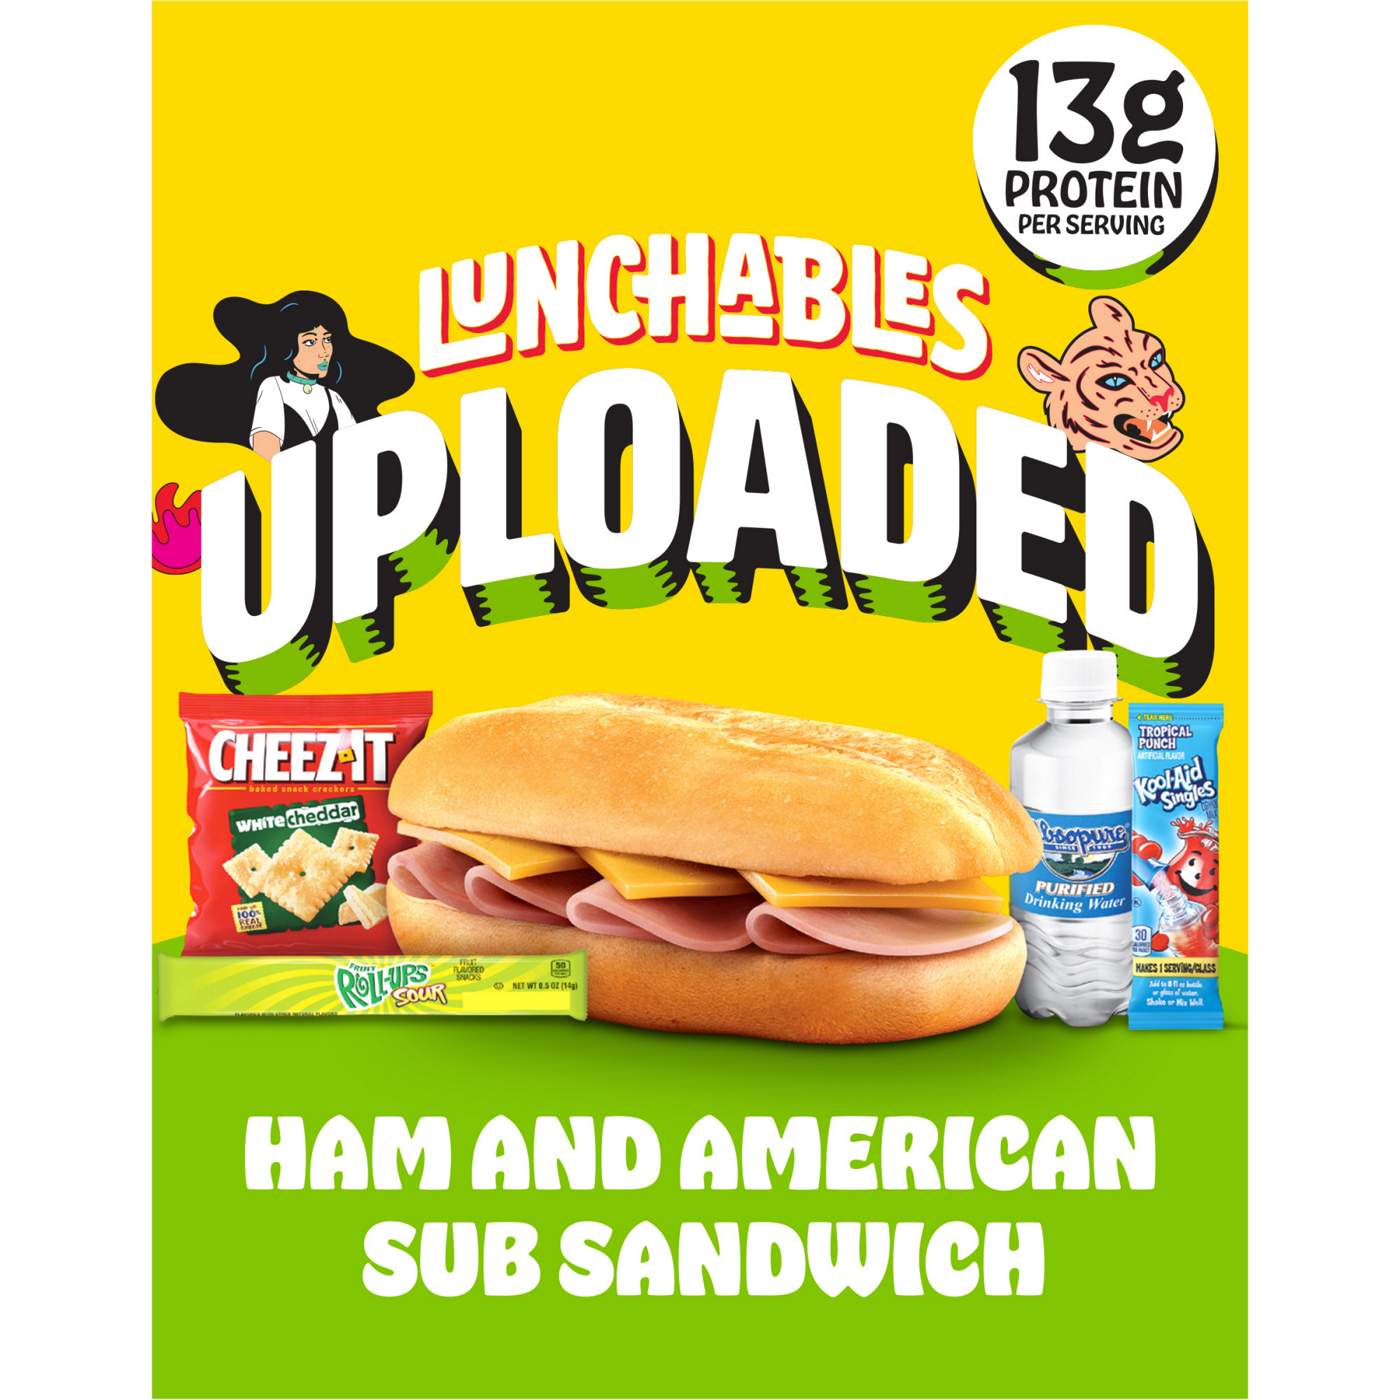 Lunchables Uploaded Meal Kit - Ham & American Sub Sandwich; image 1 of 4